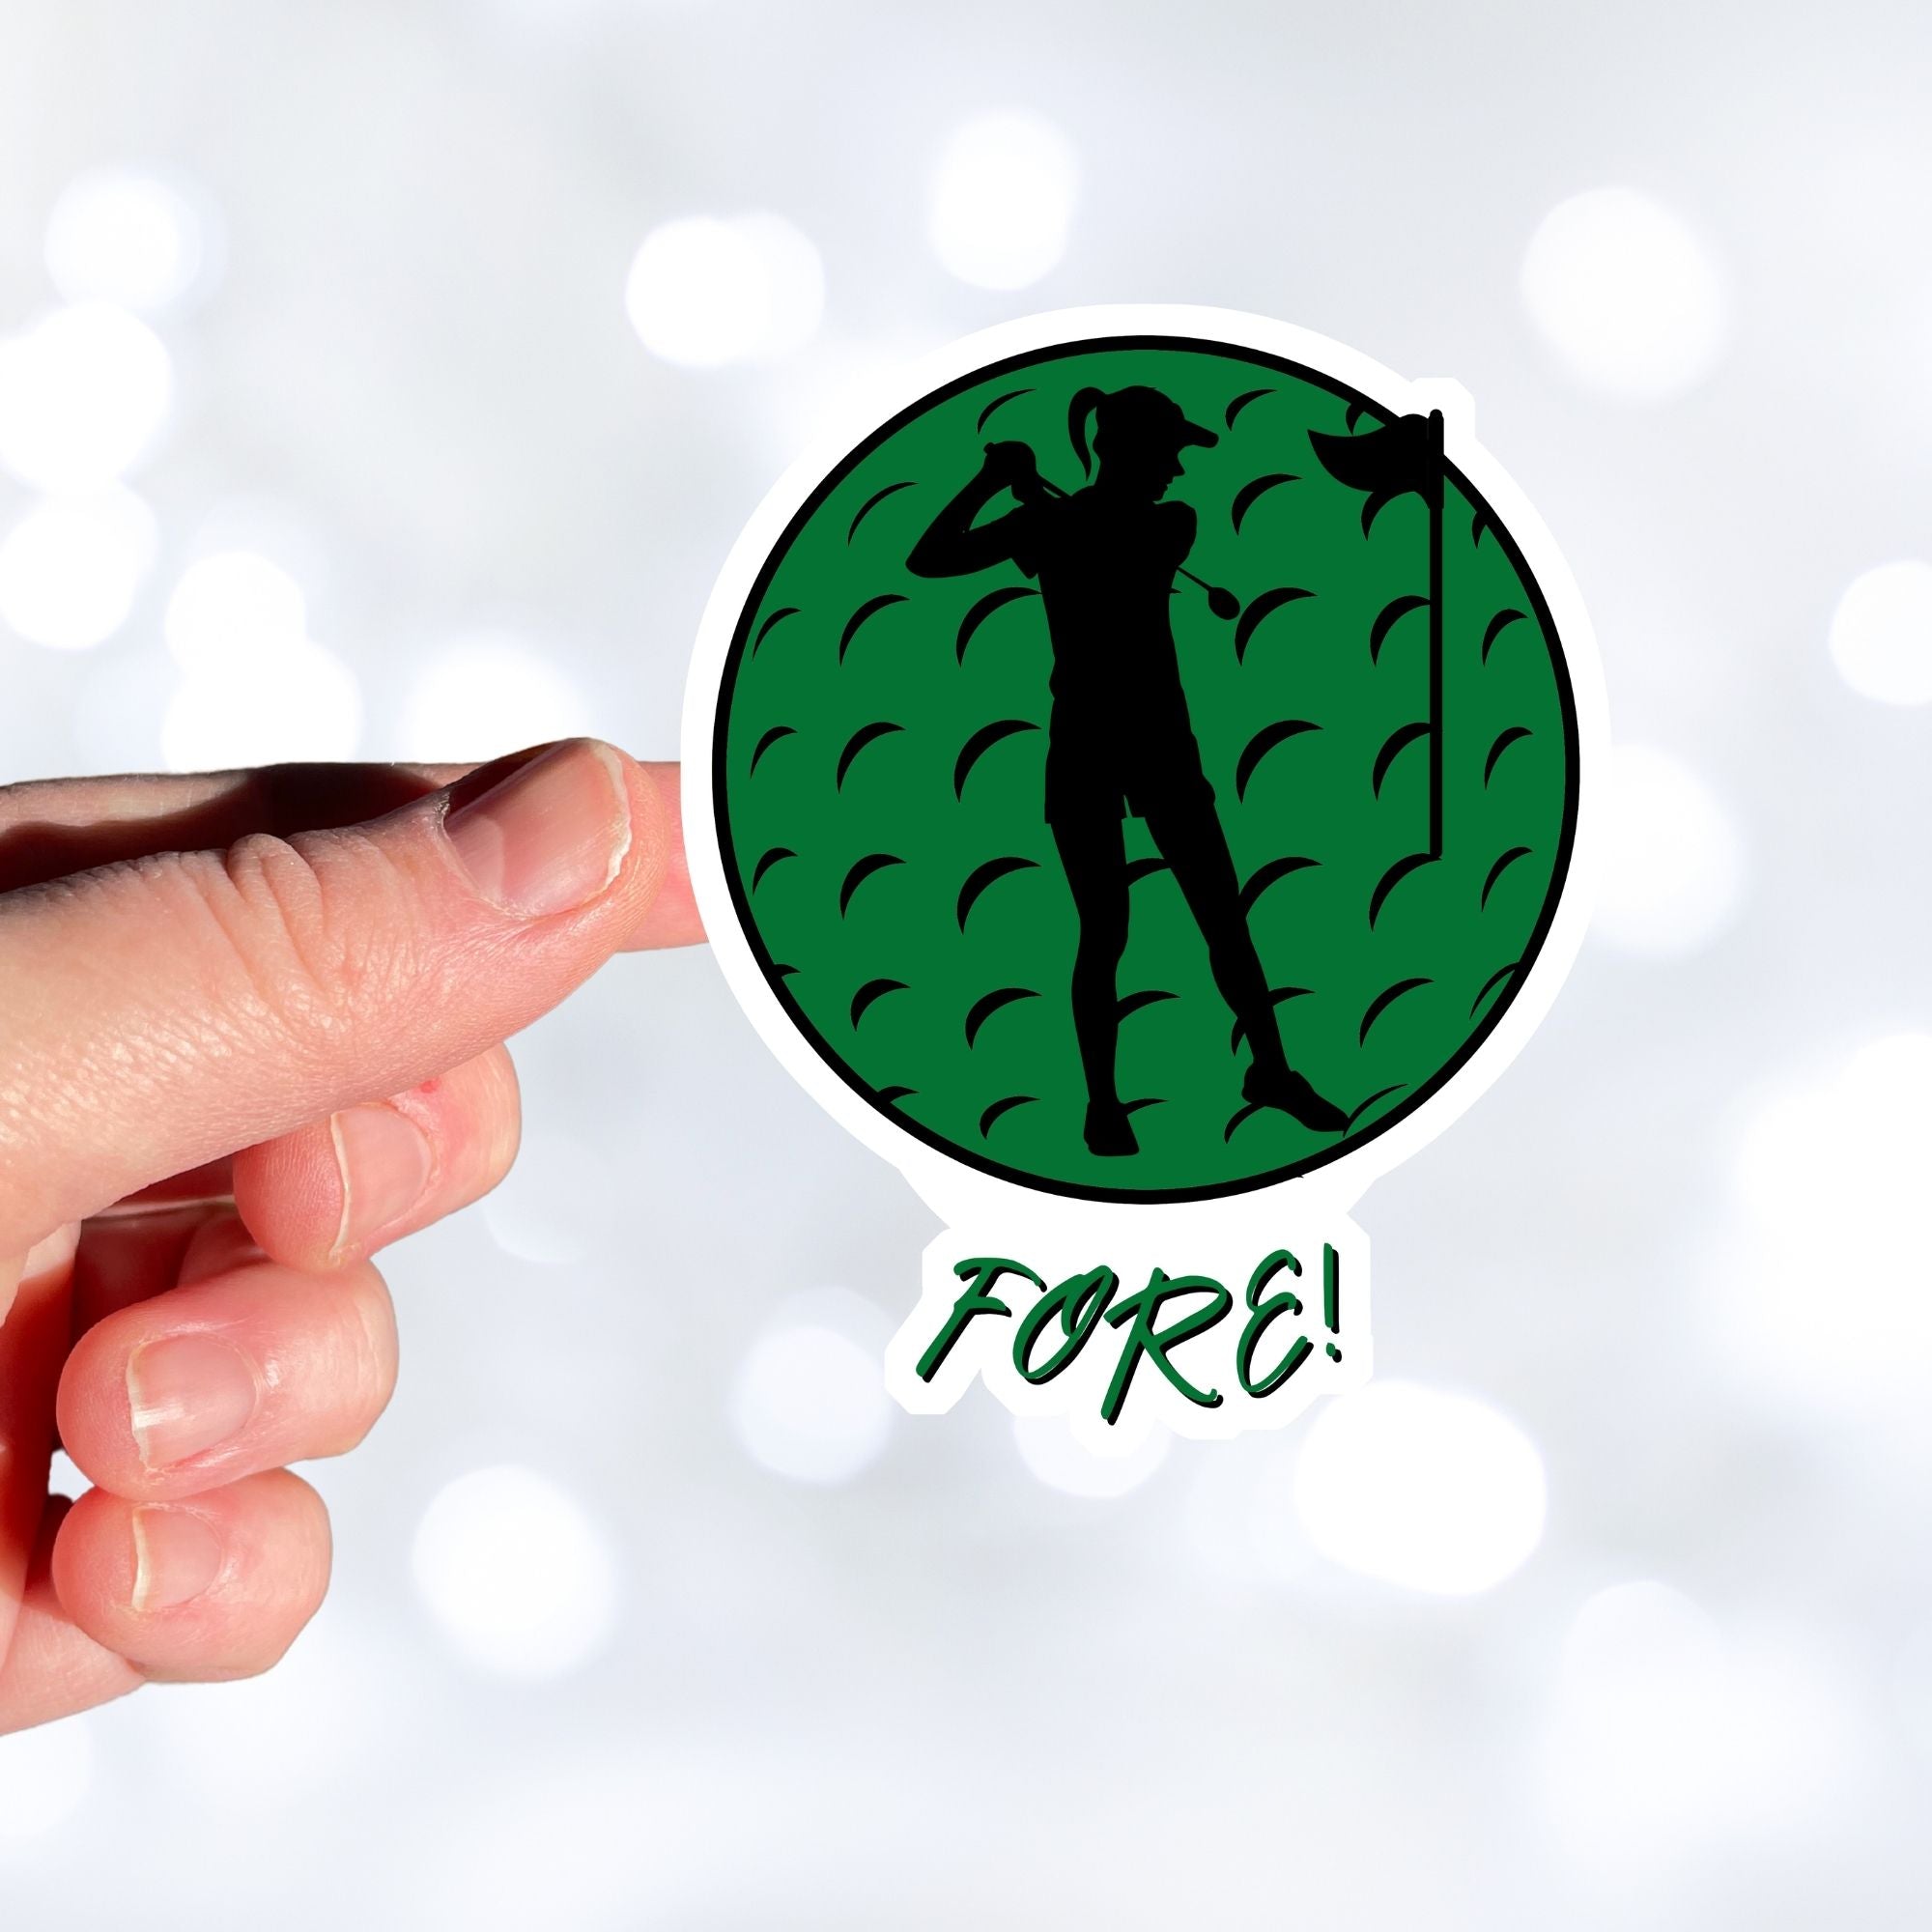 Show your love of golf with this individual die-cut sticker! This sticker shows the silhouette of a golfer with a ponytail about to swing, on a green golf ball background, with the word "Fore!" below.  This image shows a hand holding the golf sticker.